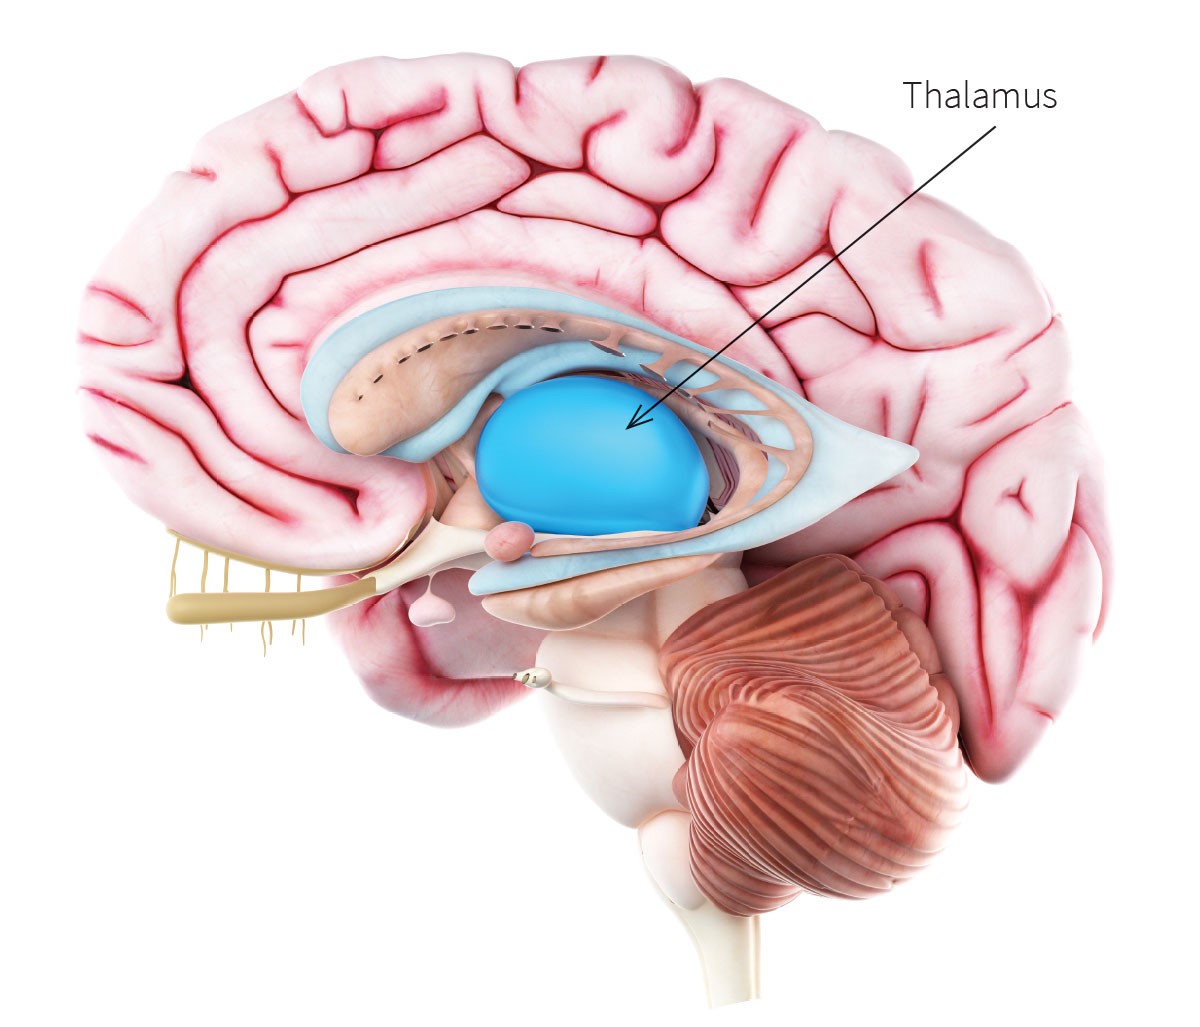 The brain’s thalamus, shown here, helps make it physical movement possible.